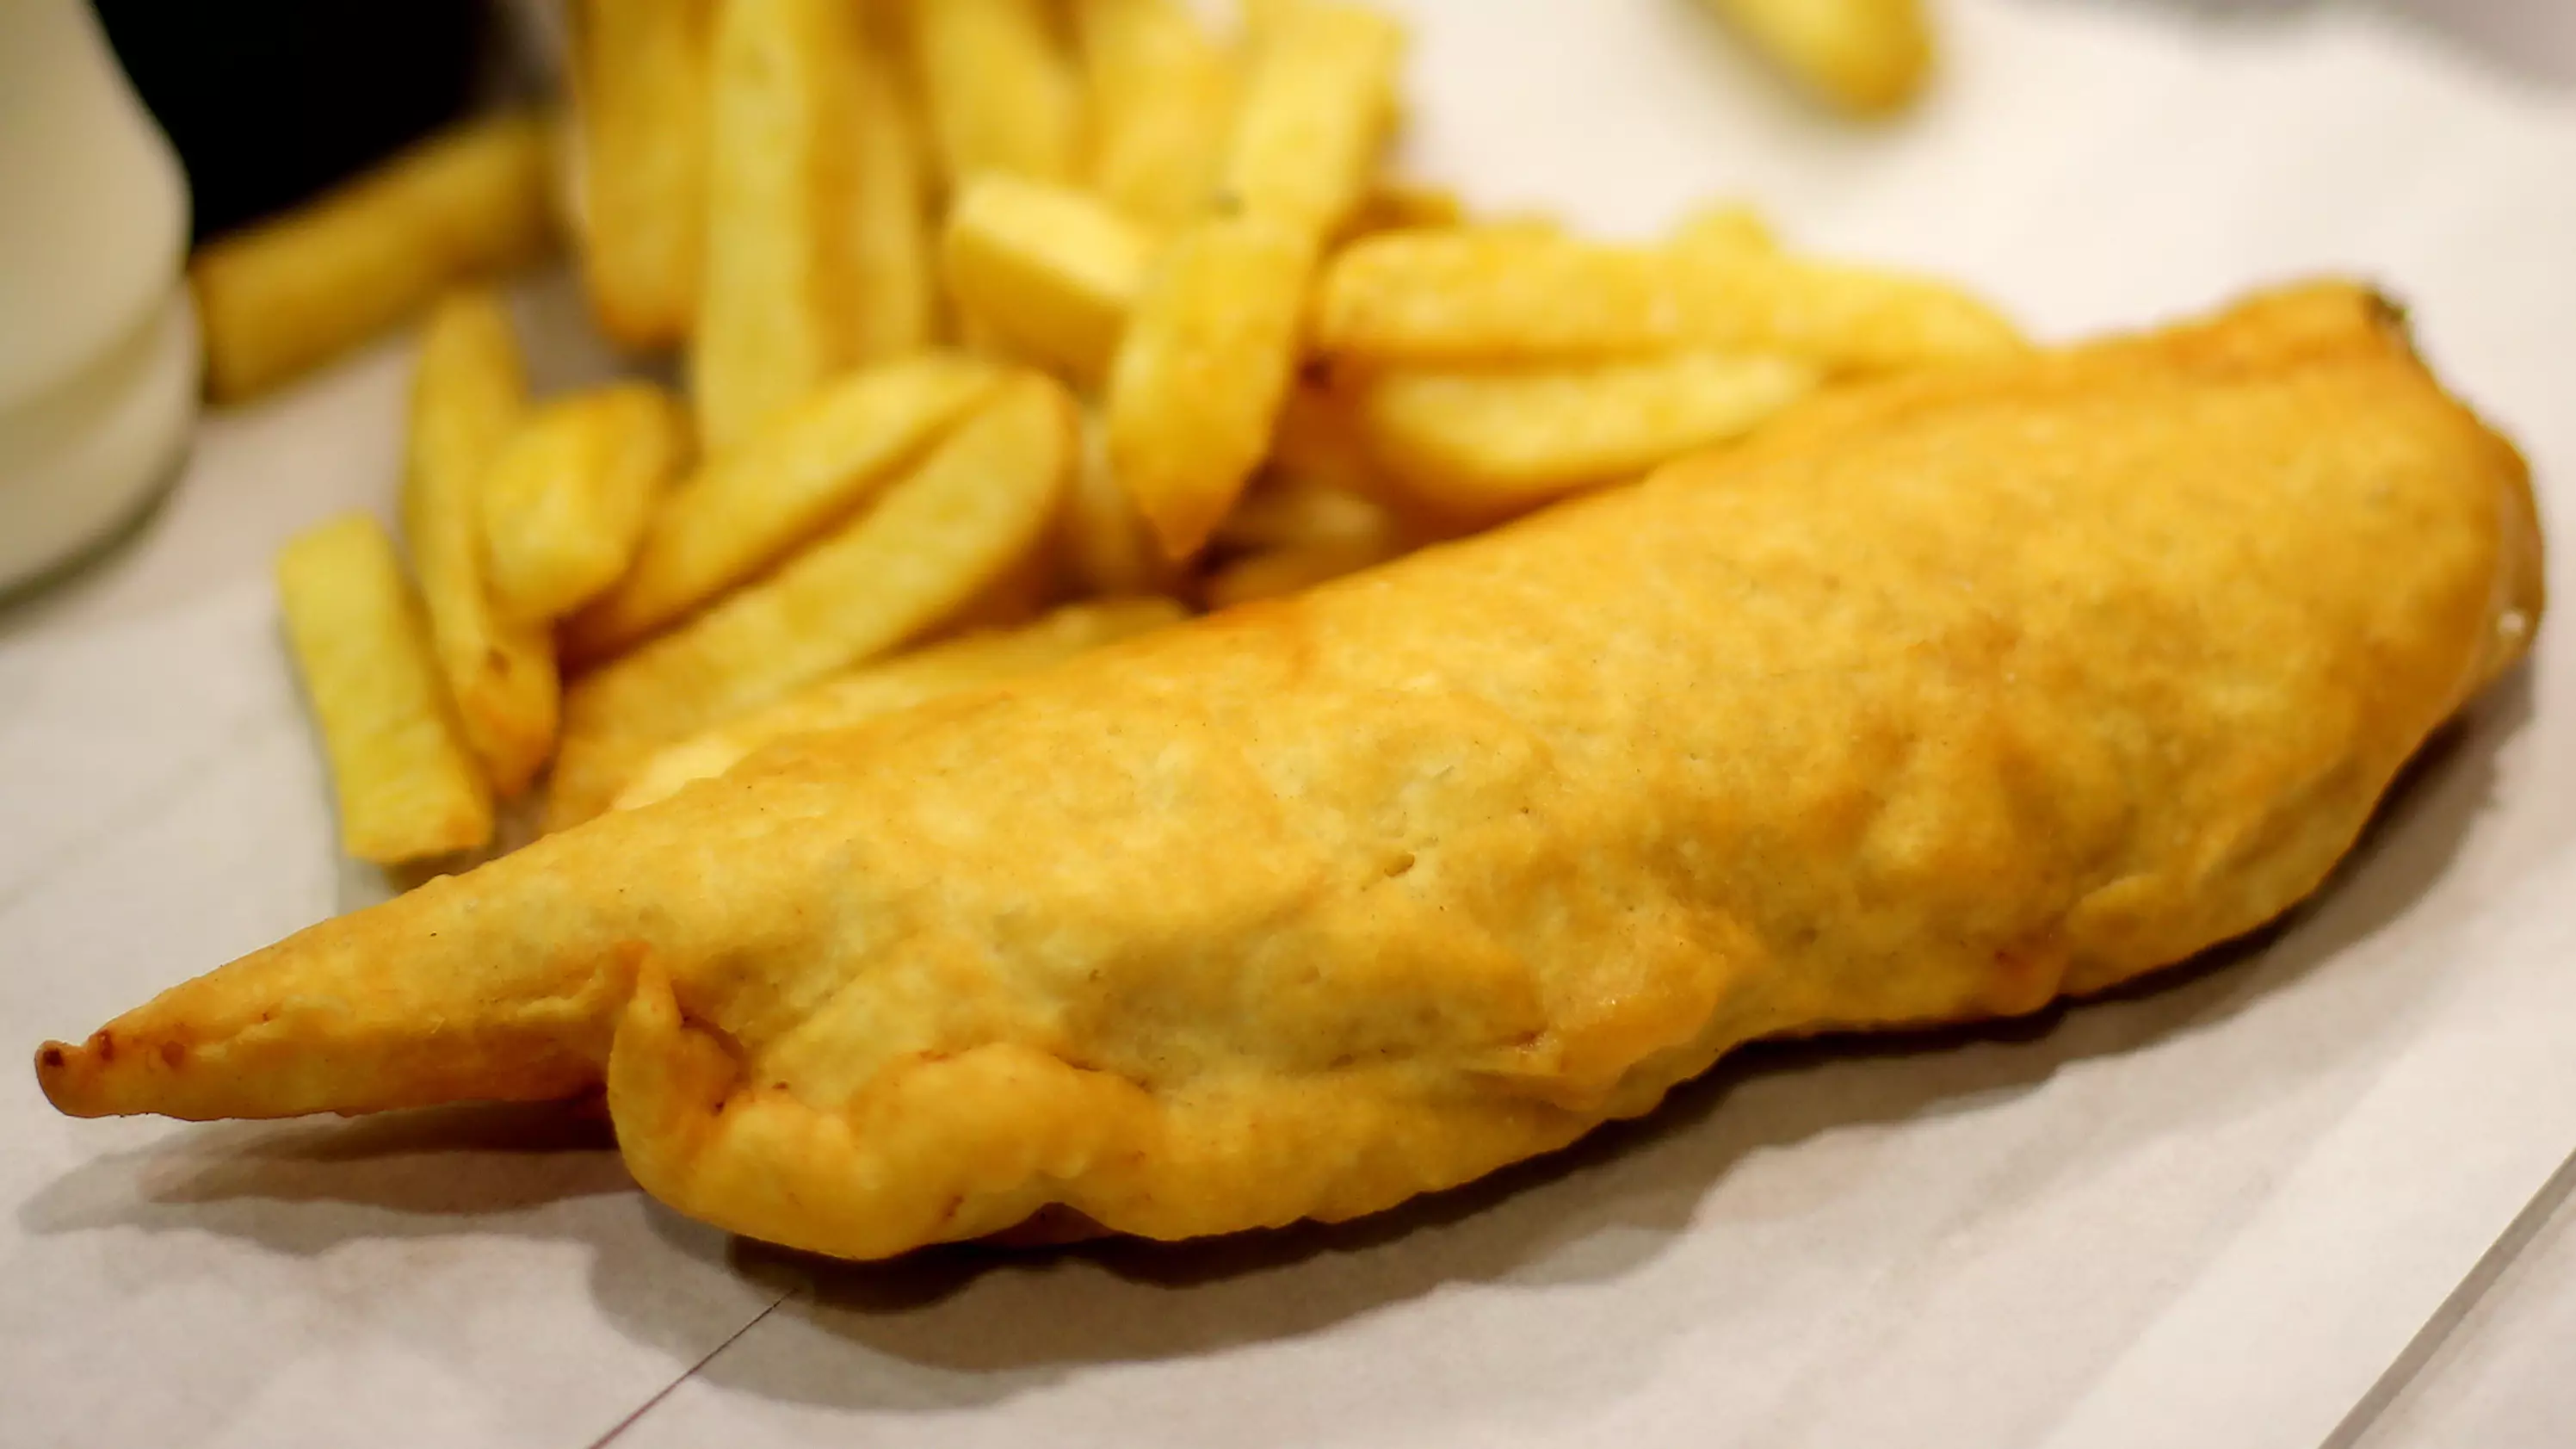 Man Says We've All Been Eating Fish And Chips Wrong